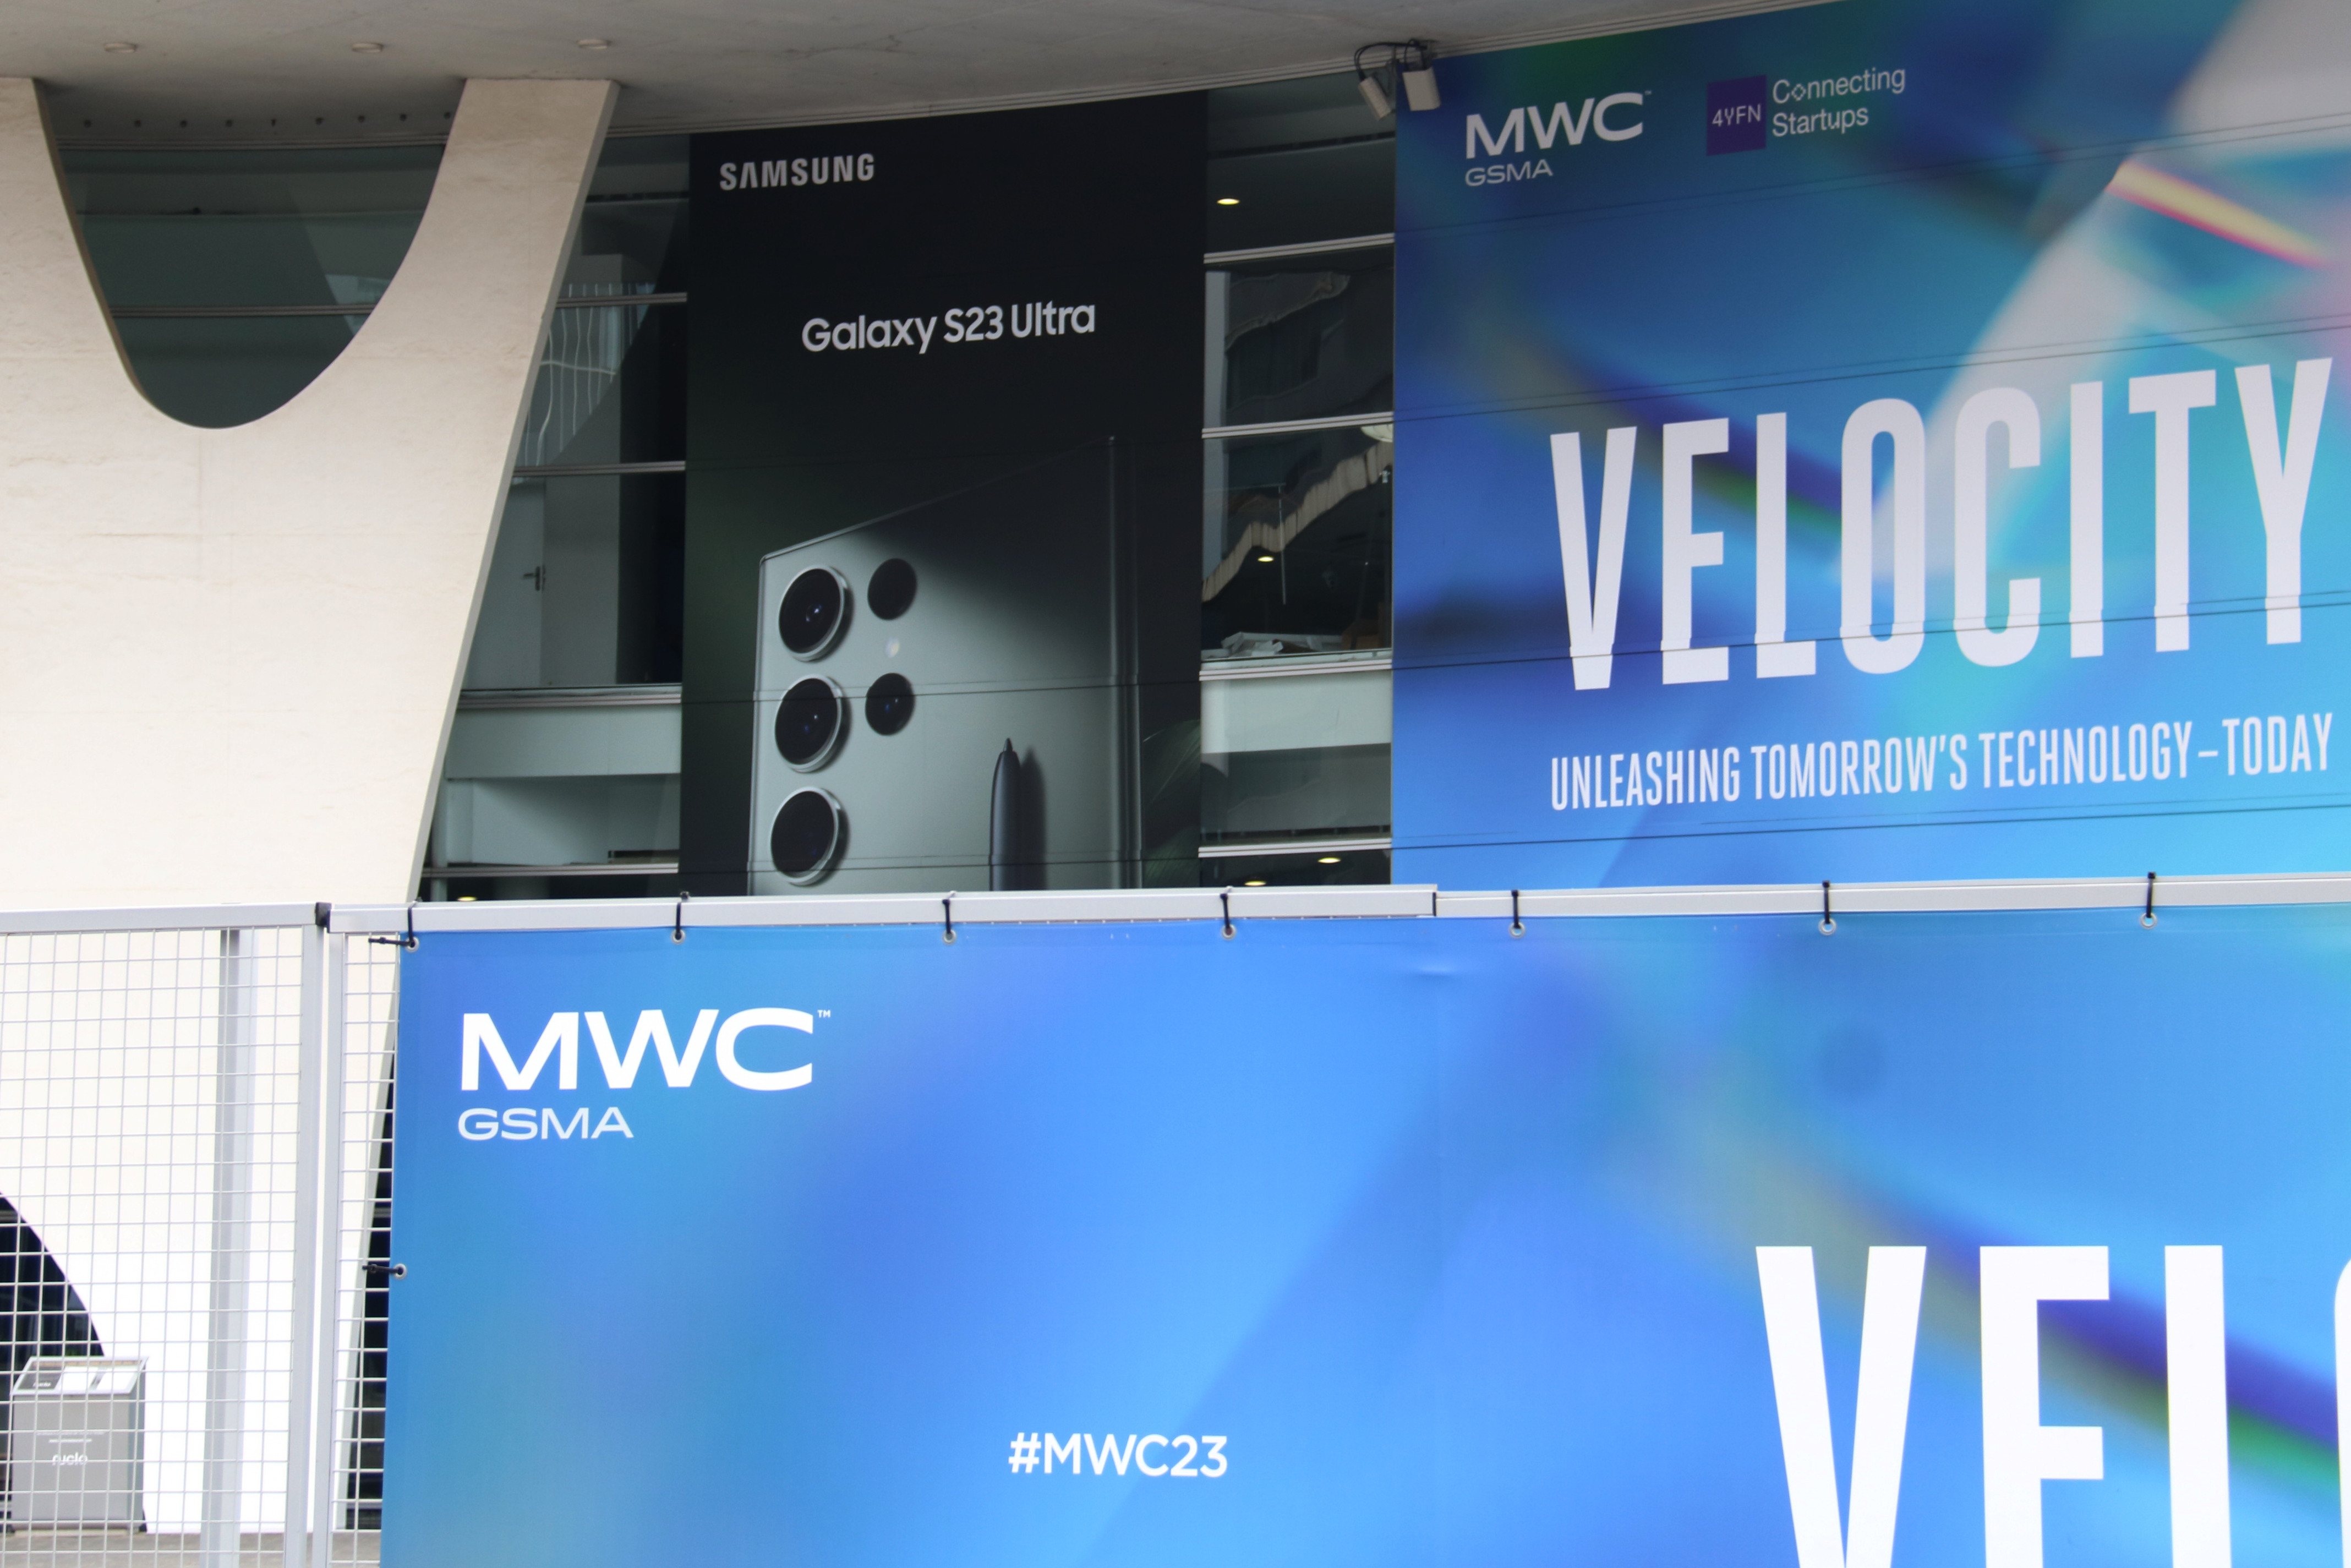 Some posters ready for the first day of MWC 2023